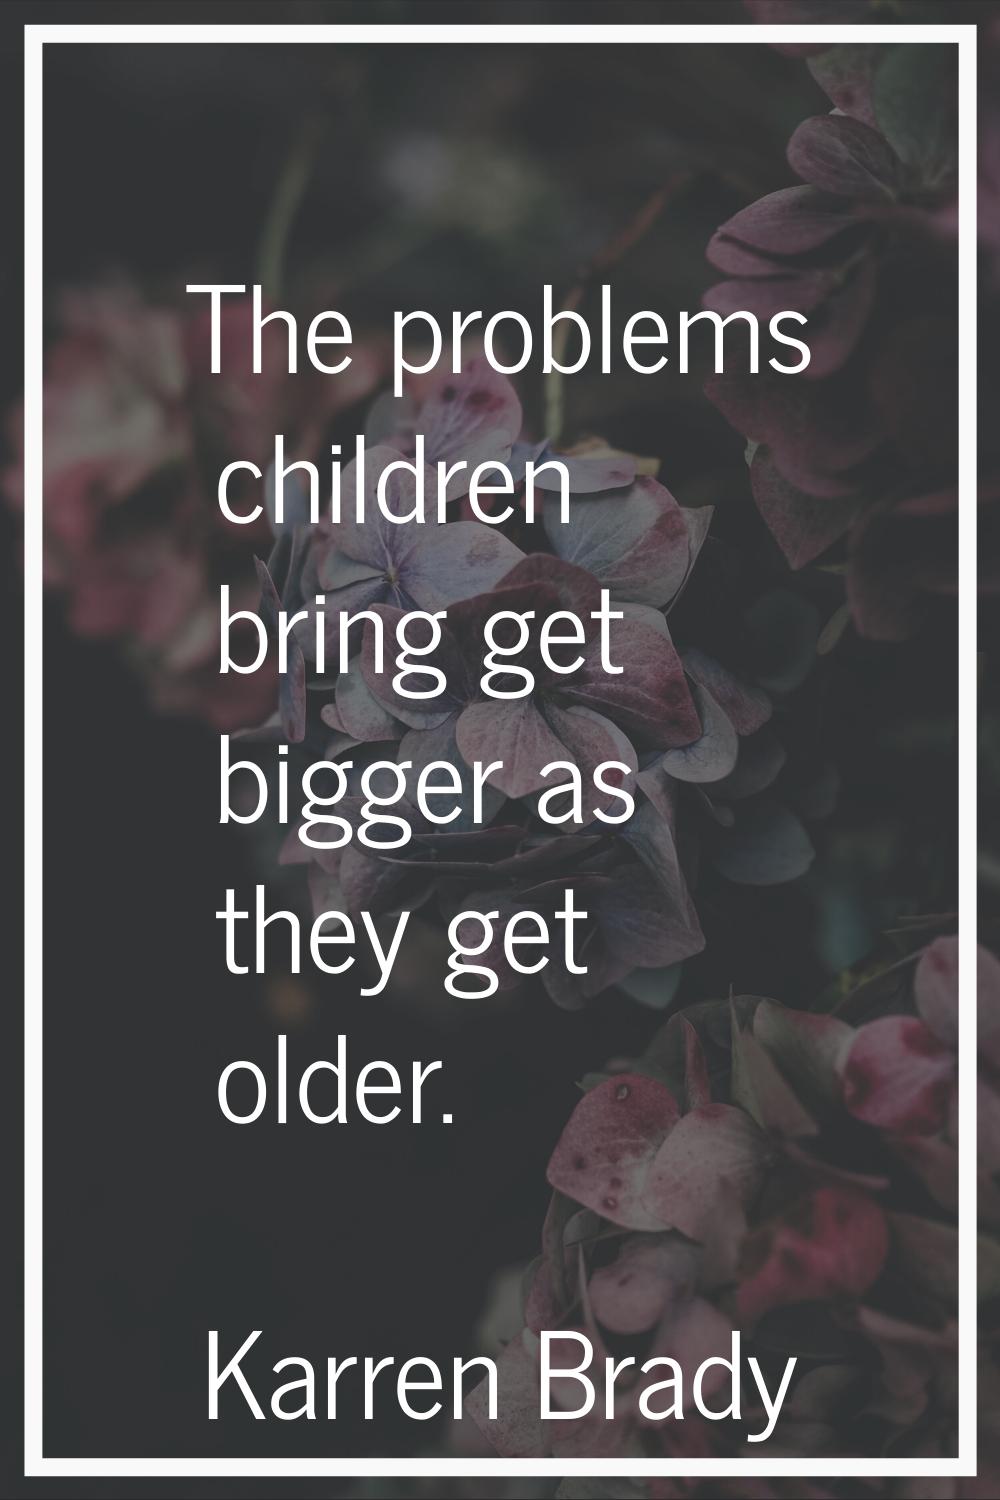 The problems children bring get bigger as they get older.